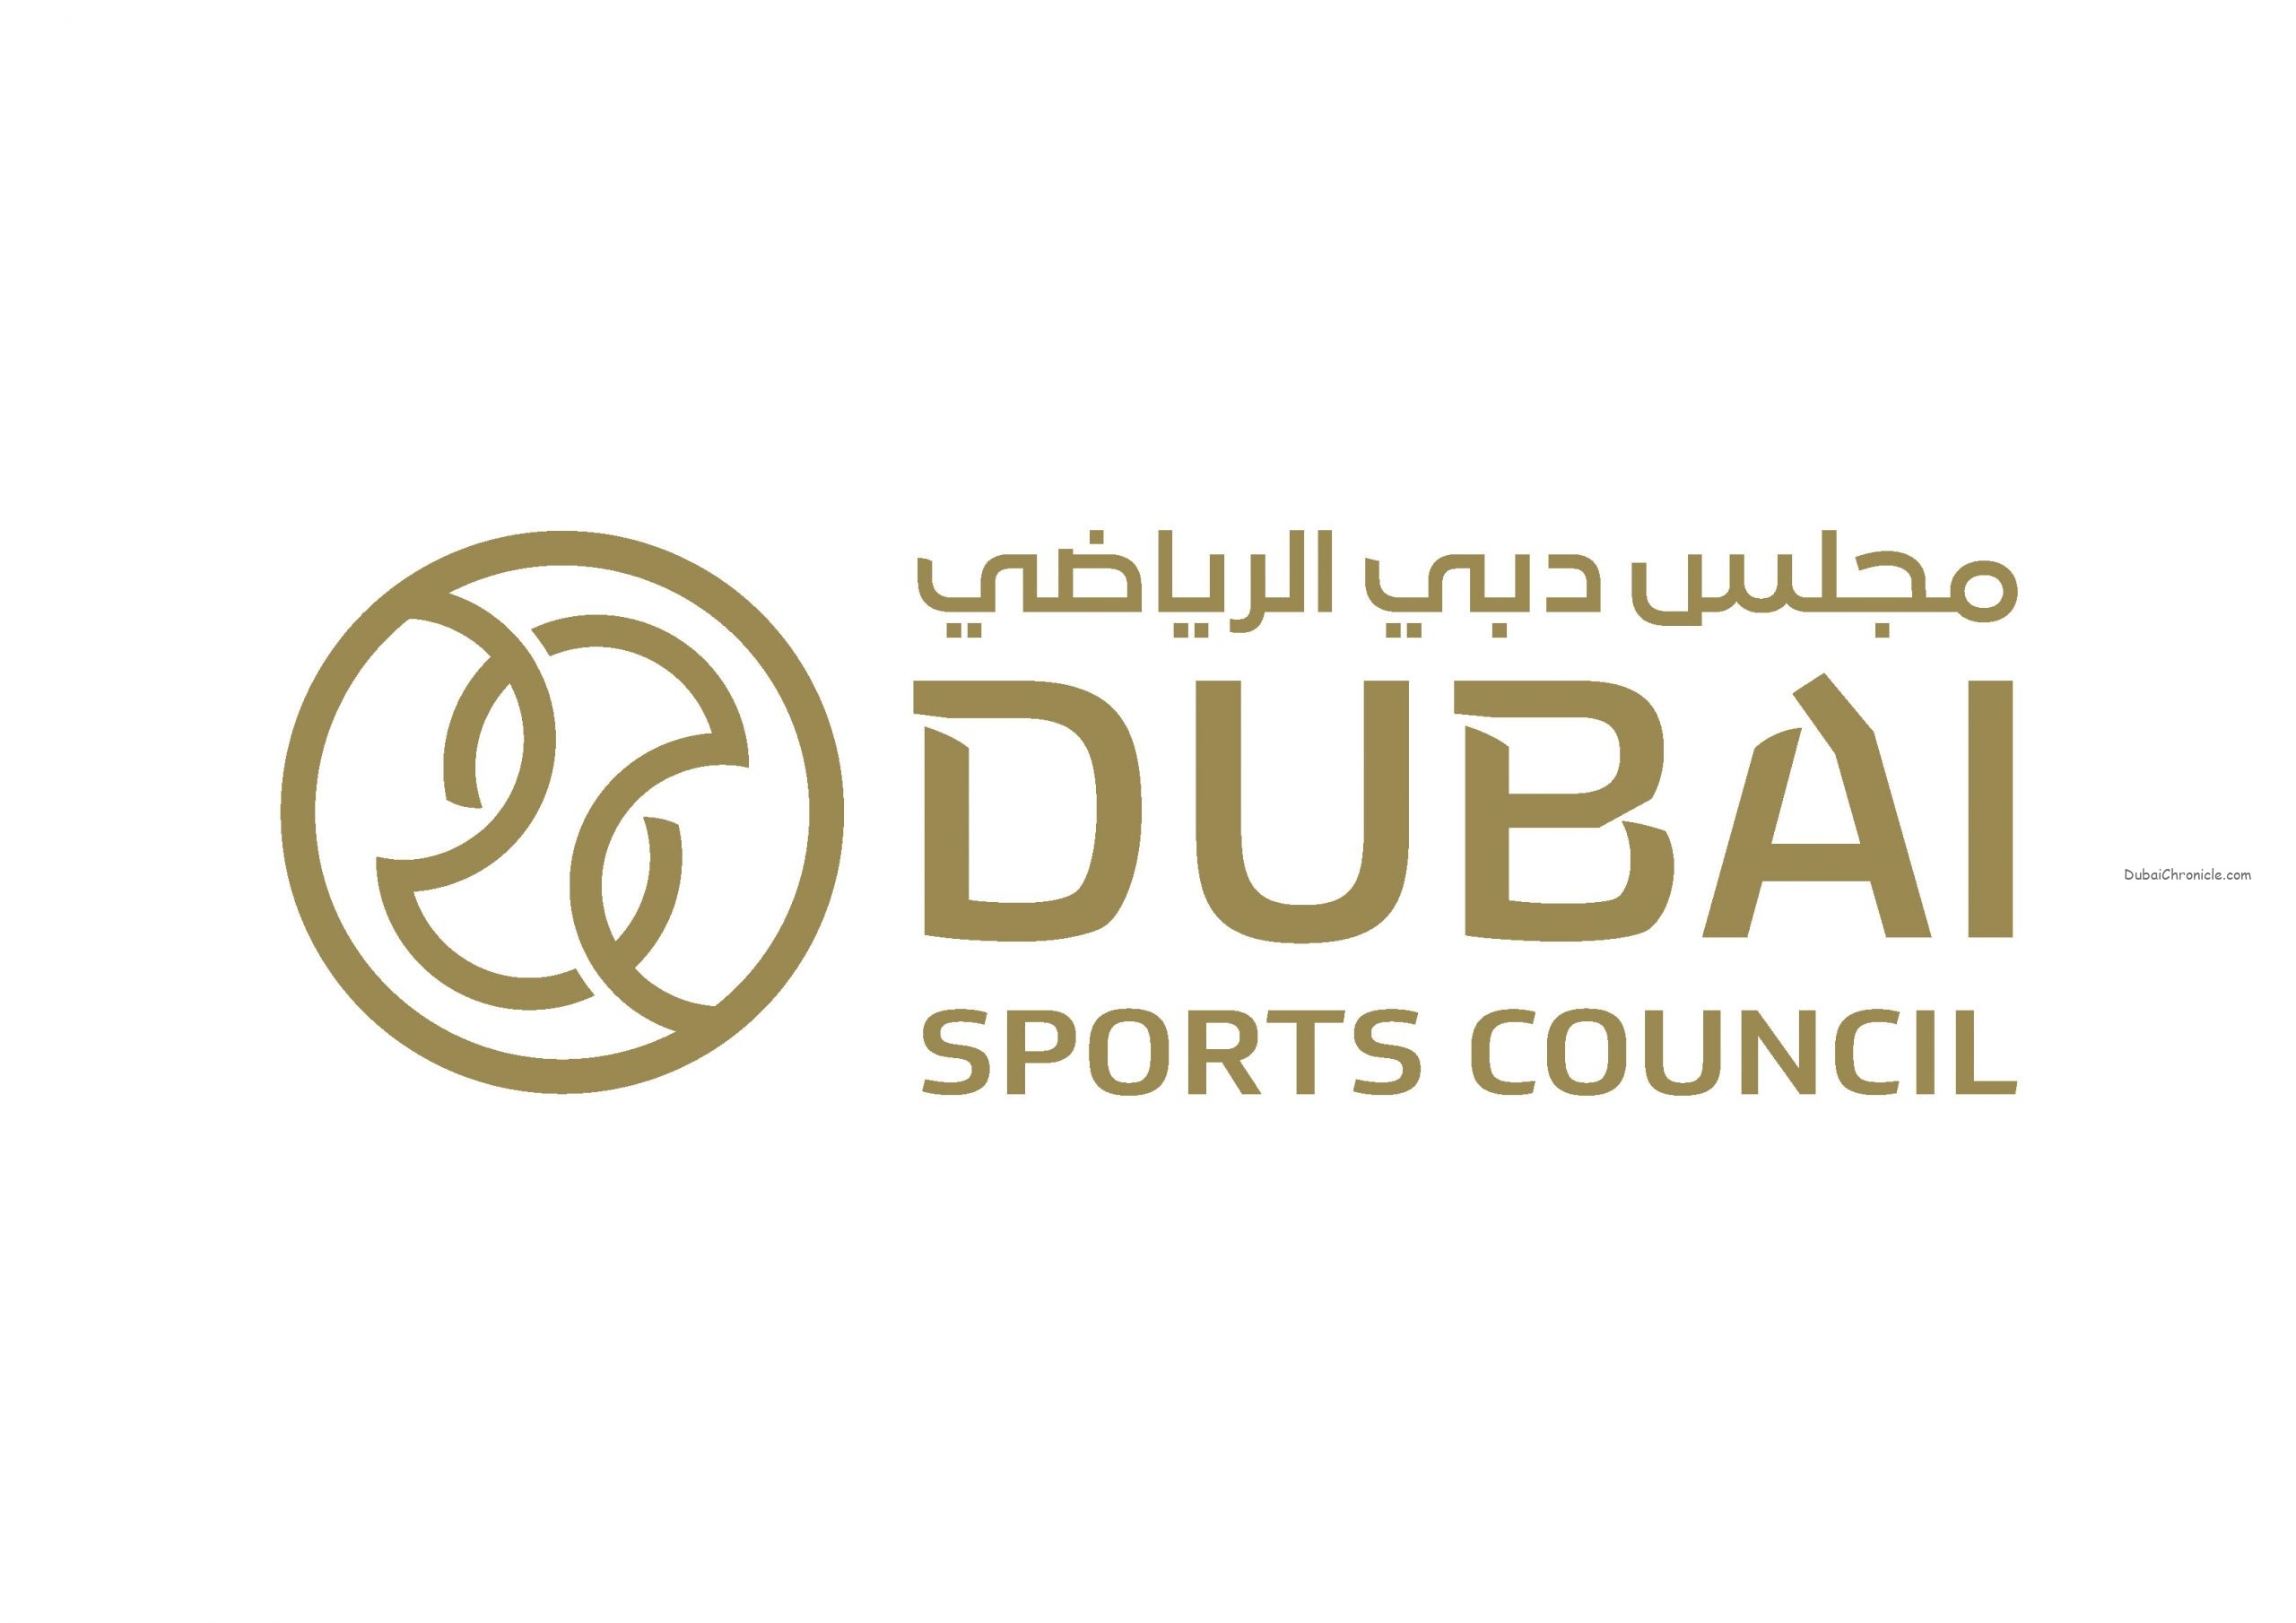 Dubai will host 111 sports events in the month of November, including 20 top international events, four of which are world championships.